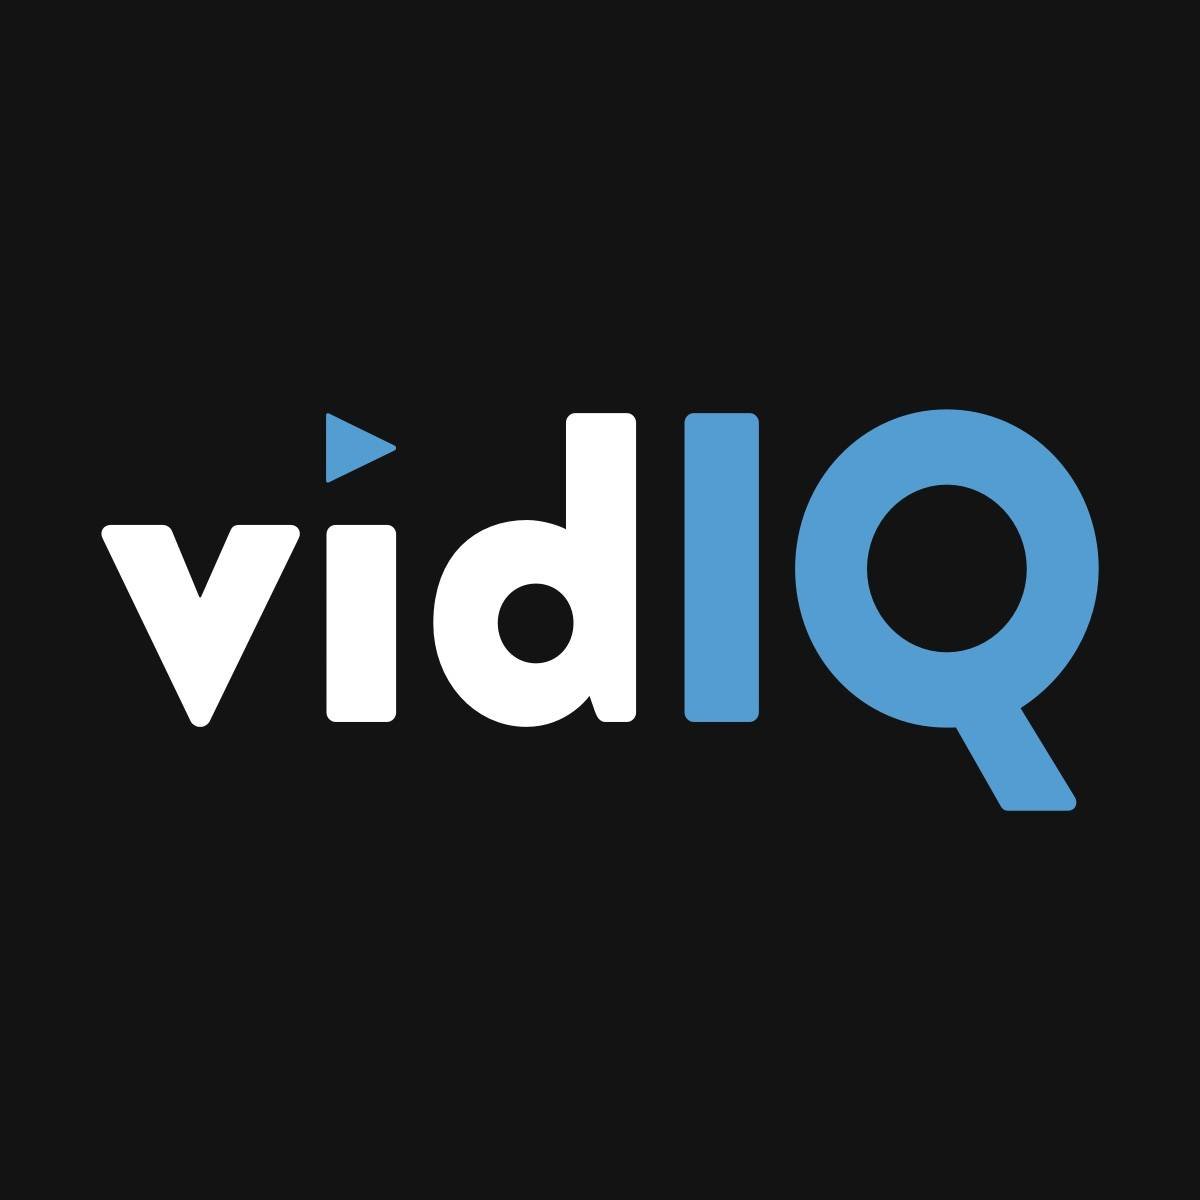 VidIQ - pricing, customer reviews, features, free plans, alternatives, comparisons, service costs.